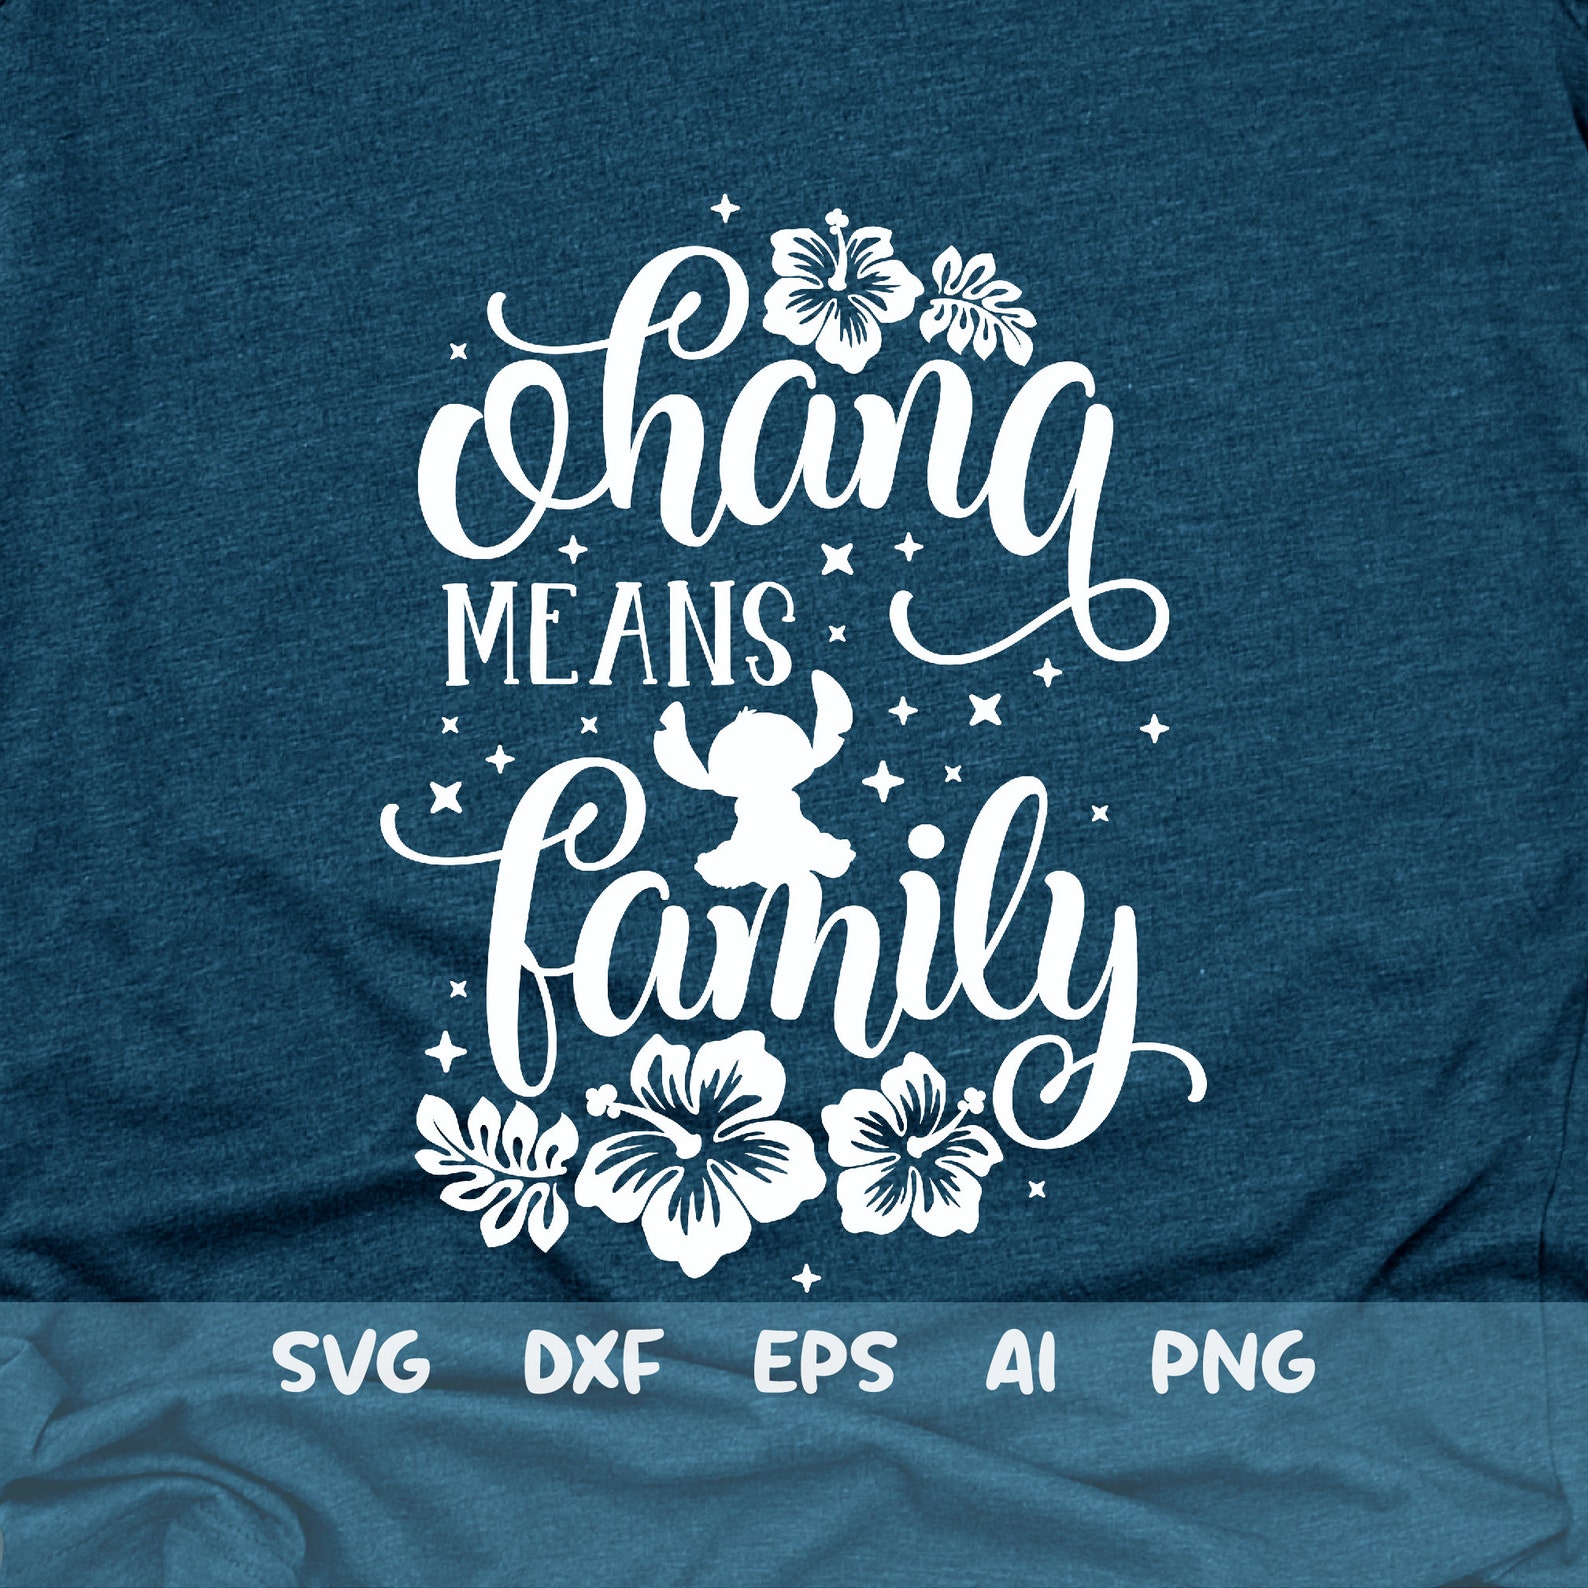 Download Ohana Means Family Quote Svg 976 File Include Svg Png Eps Dxf Free Svg Cut File To Create Your Next Diy Project Free Svg Cut Files